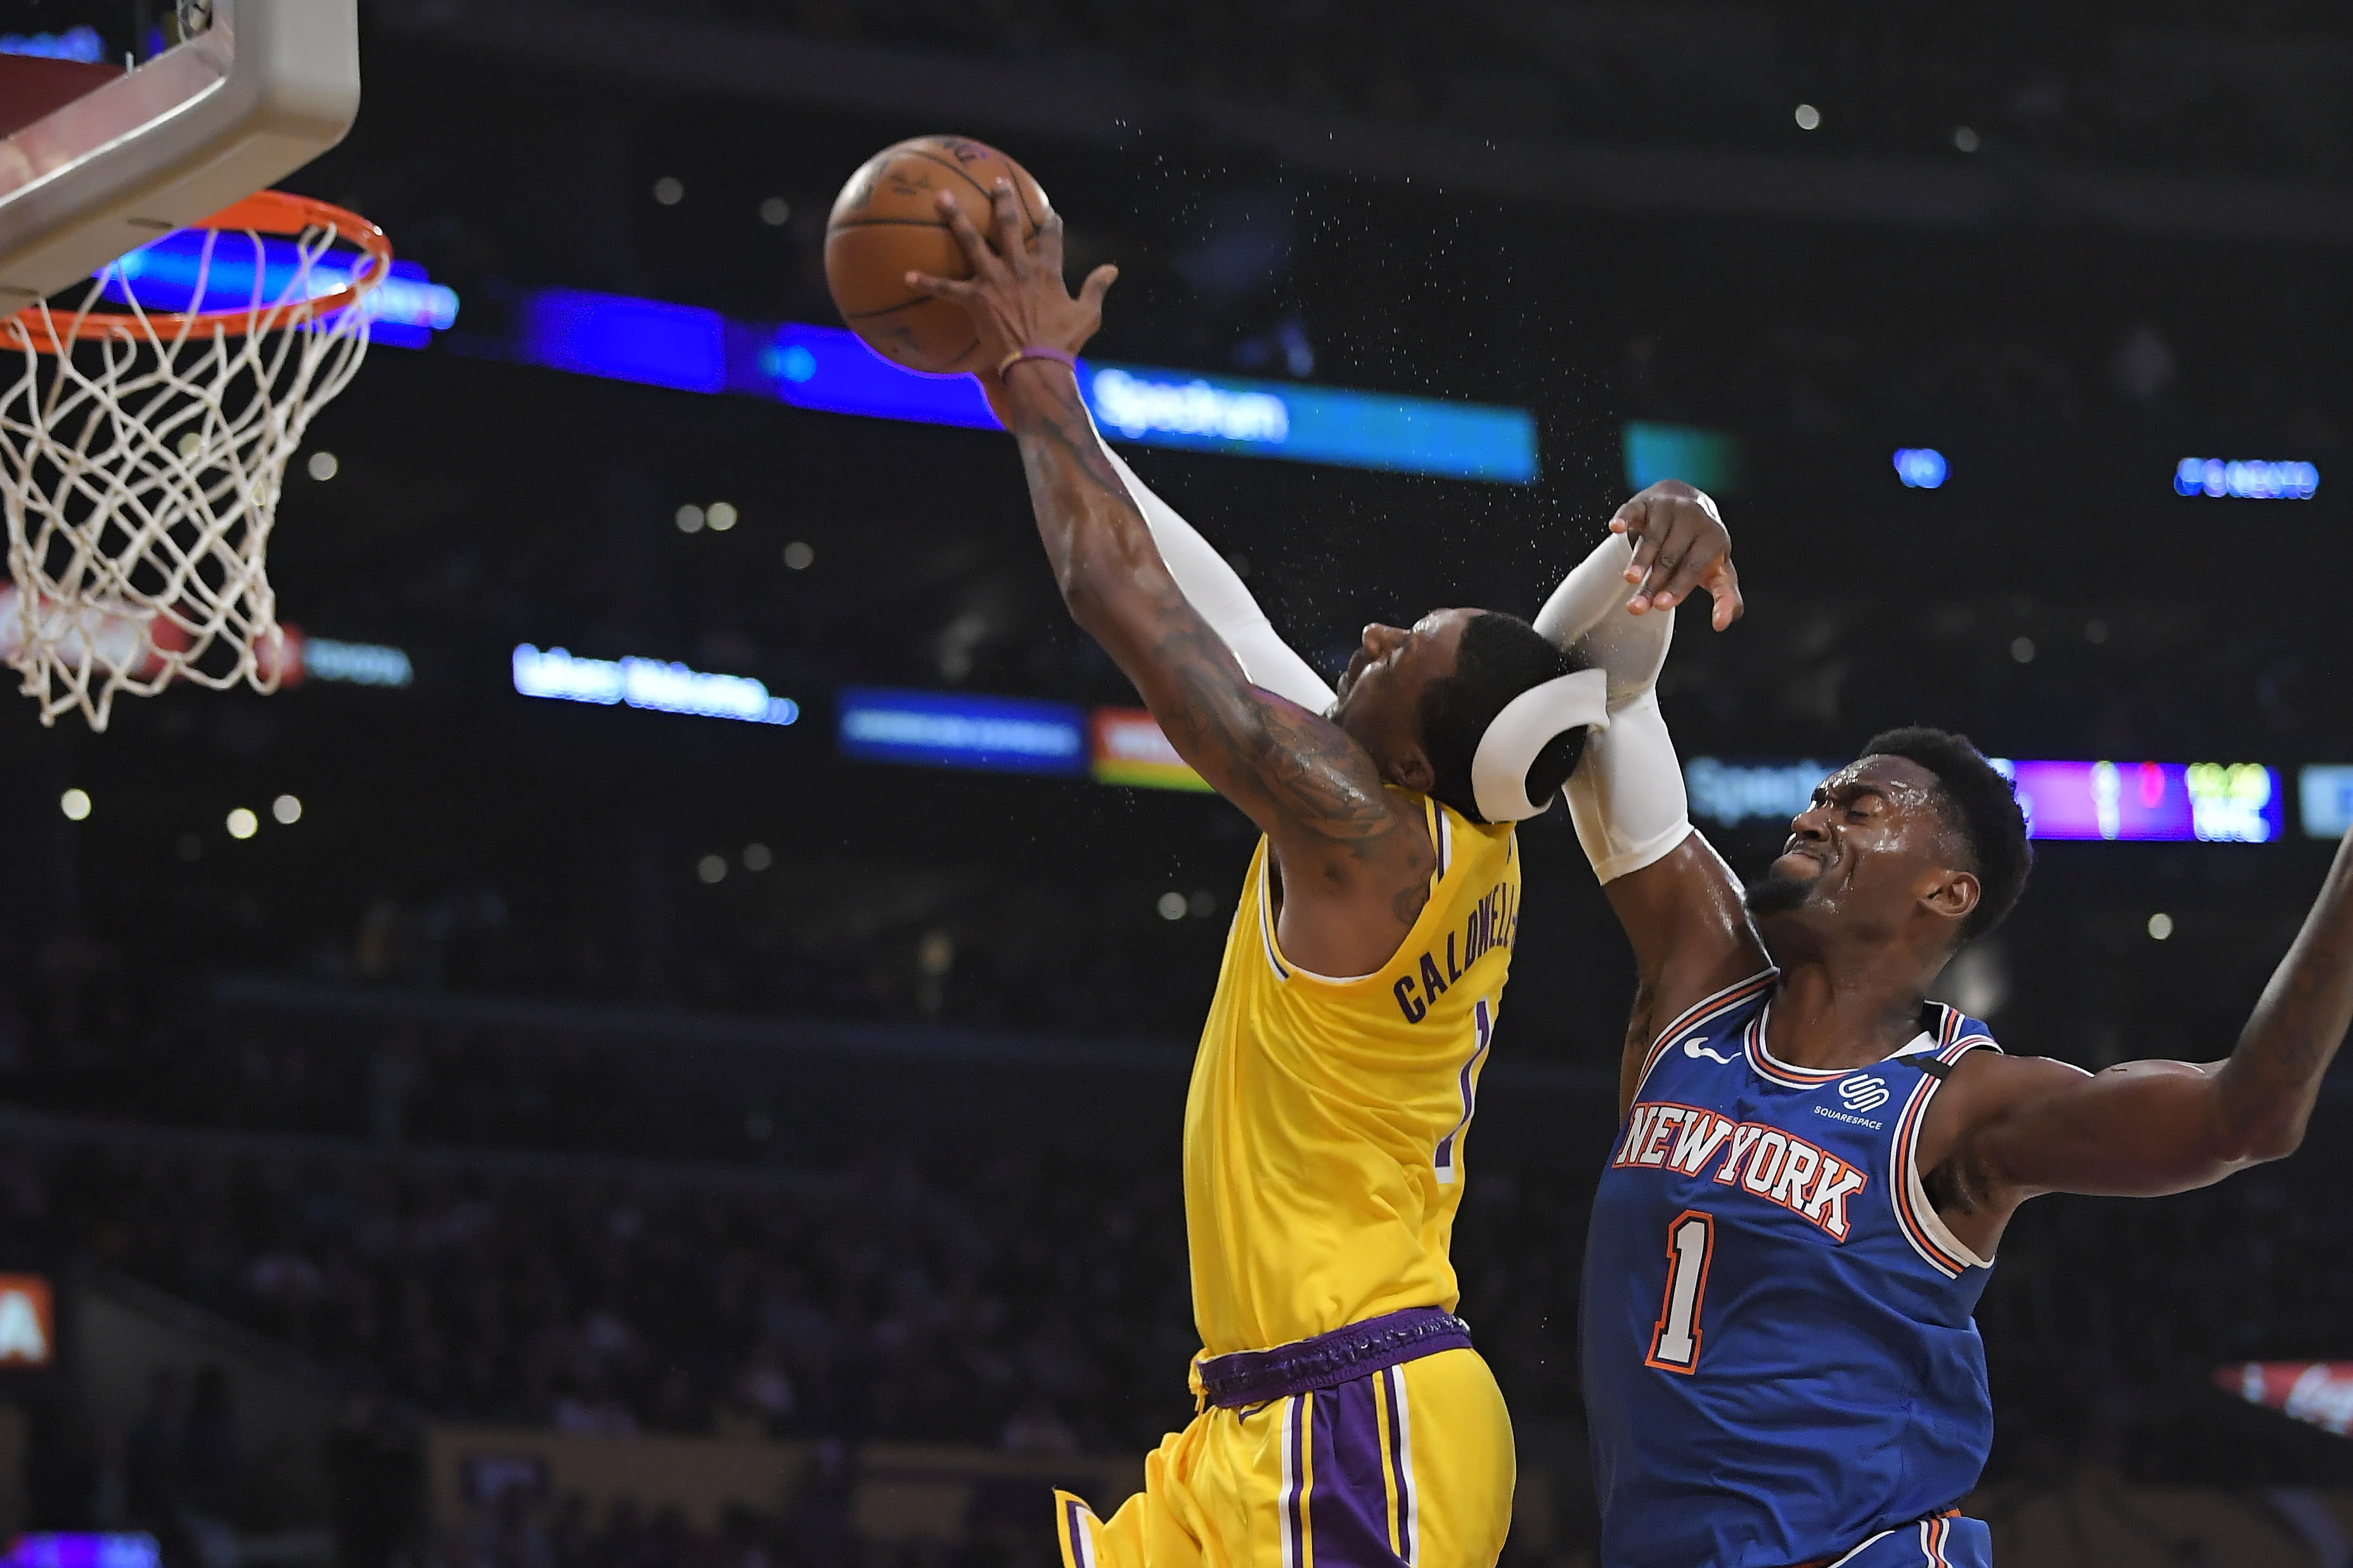 NBA: Bobby Portis ejected for cheap shot on Kentavious Caldwell-Pope